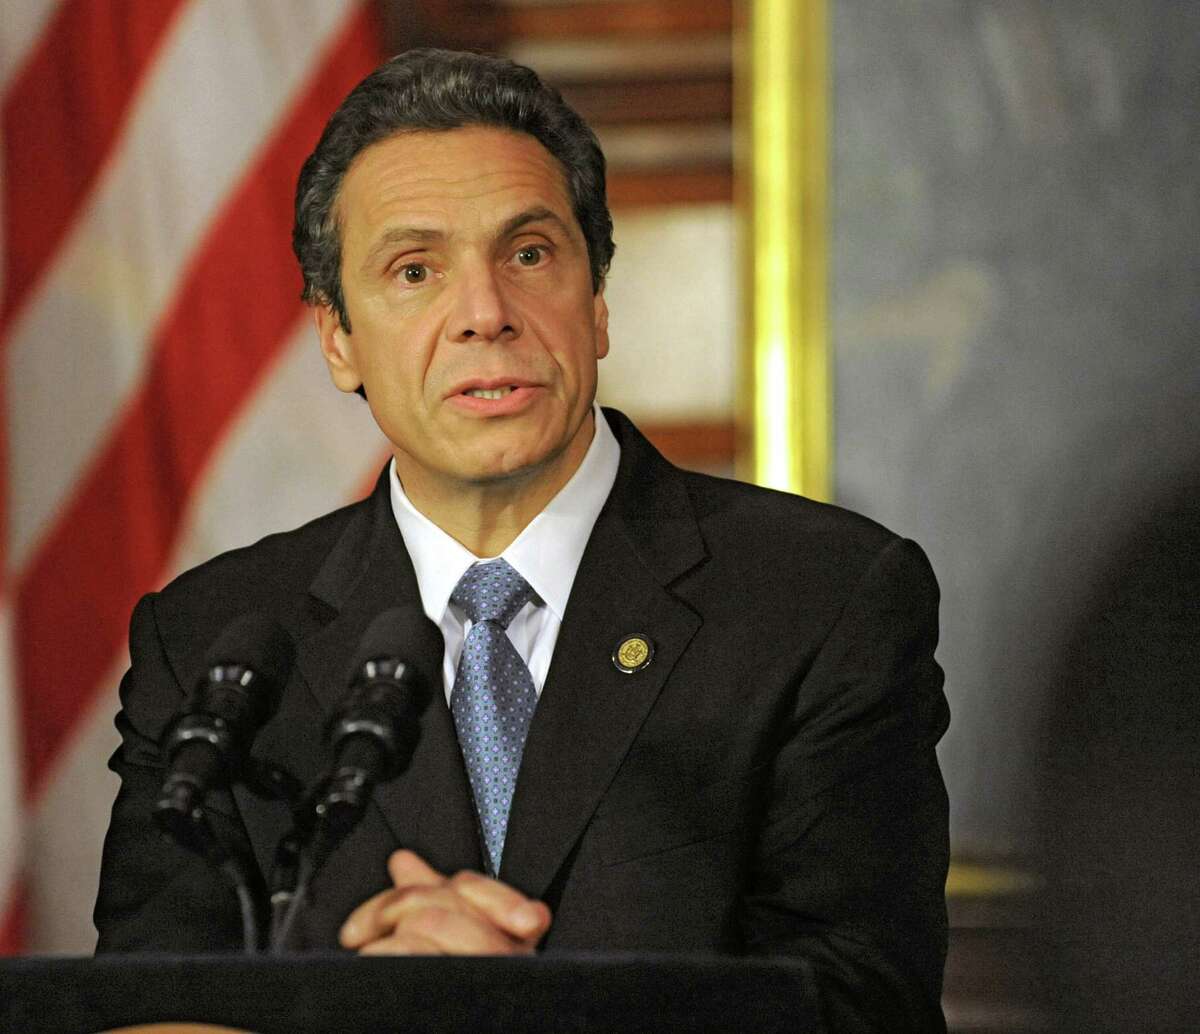 NYS Governor Andrew Cuomo answers questions at a press conference during a special session at the Capitol on Wednesday, Dec. 7, 2011 in Albany, N.Y. (Lori Van Buren / Times Union)